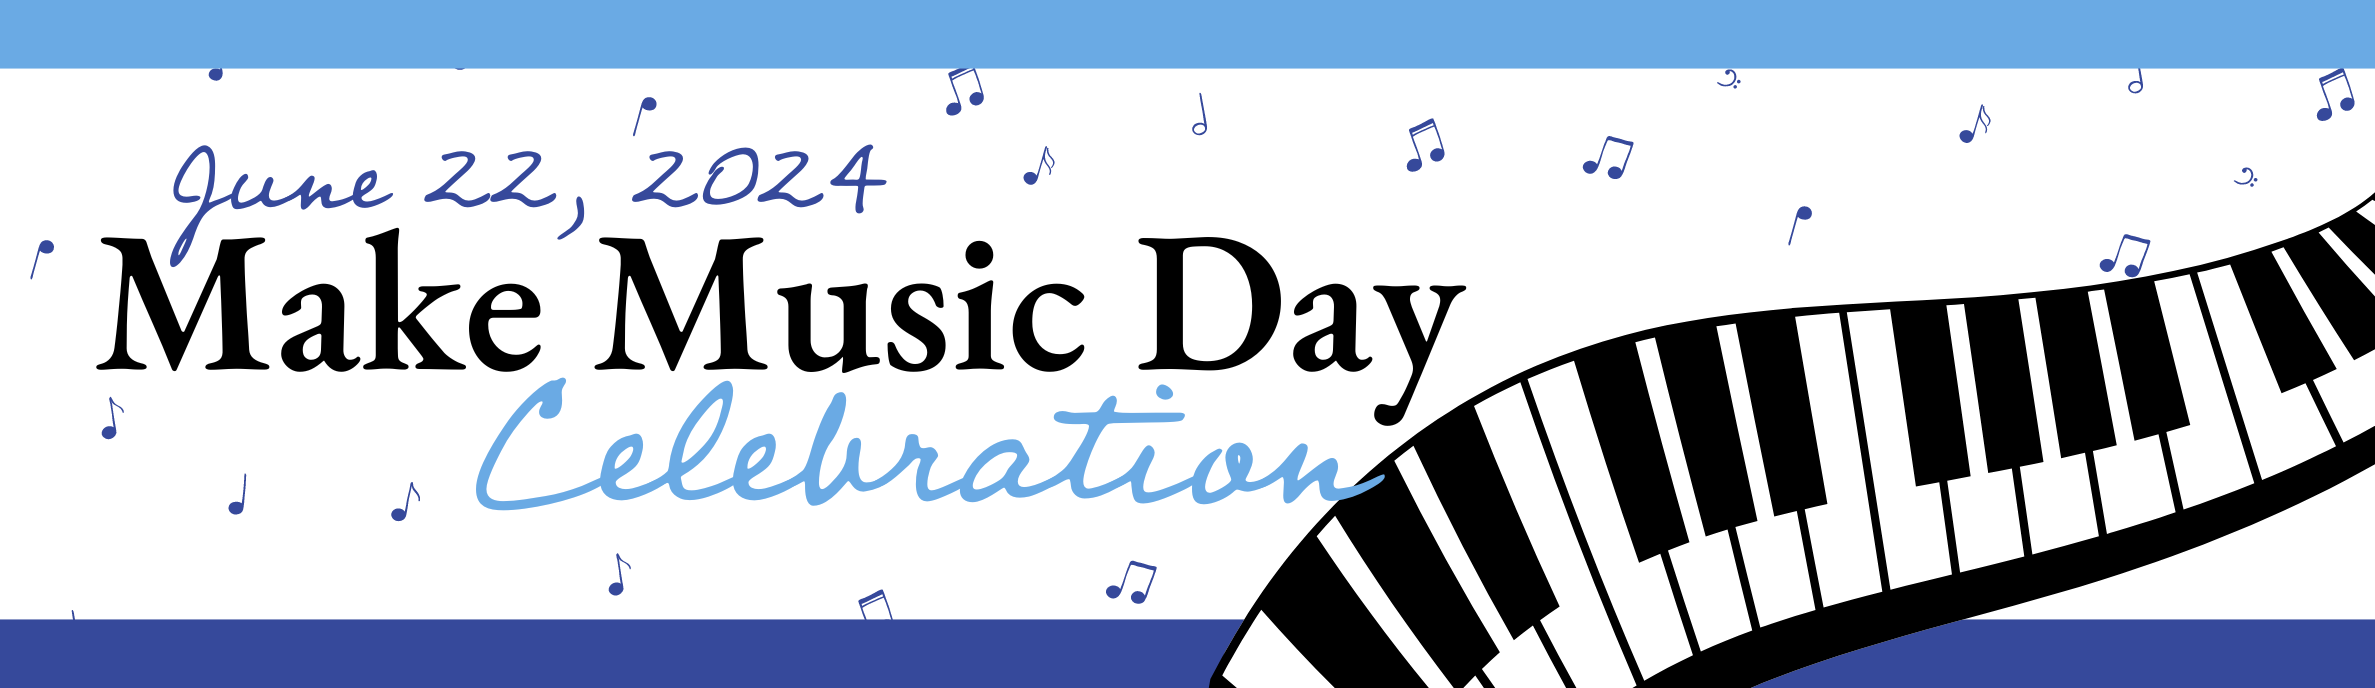 Make Music Day Event